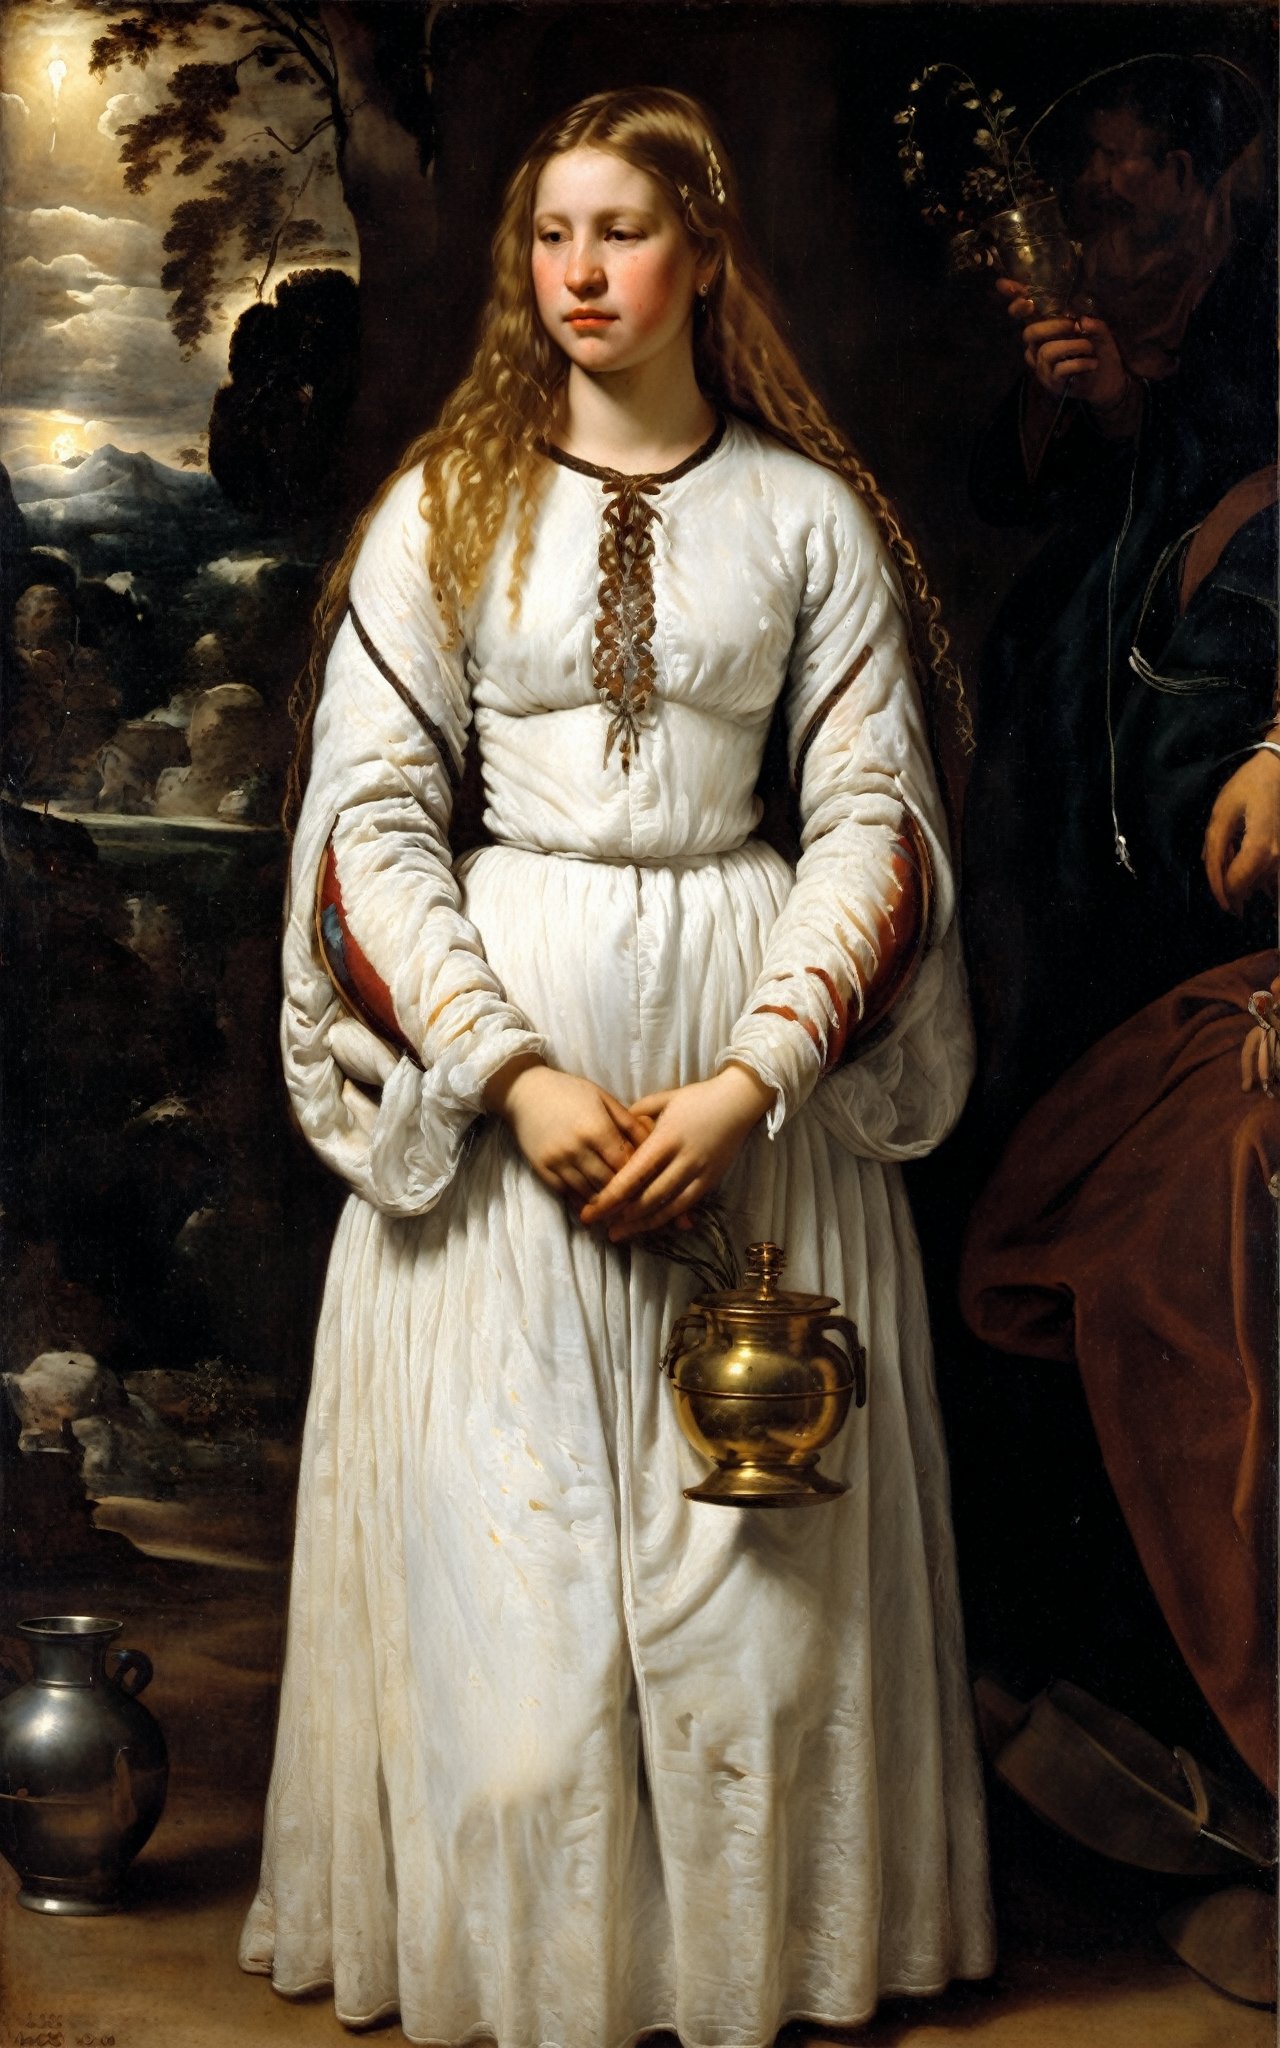 A serene portrait of a girl with long, golden blonde hair intricately adorned with multiple complex braids, stands tall in a white gossamer bell-sleeve dress, its delicate fabric shimmering under warm, golden light. Framed from the waist up, her flowing gown and braided locks take center stage. The soft glow highlights the gentle curves of her face and subtle smile, as if captured in a fleeting moment of quiet contemplation. Oil on canvas by Velazquez, circa 1640.